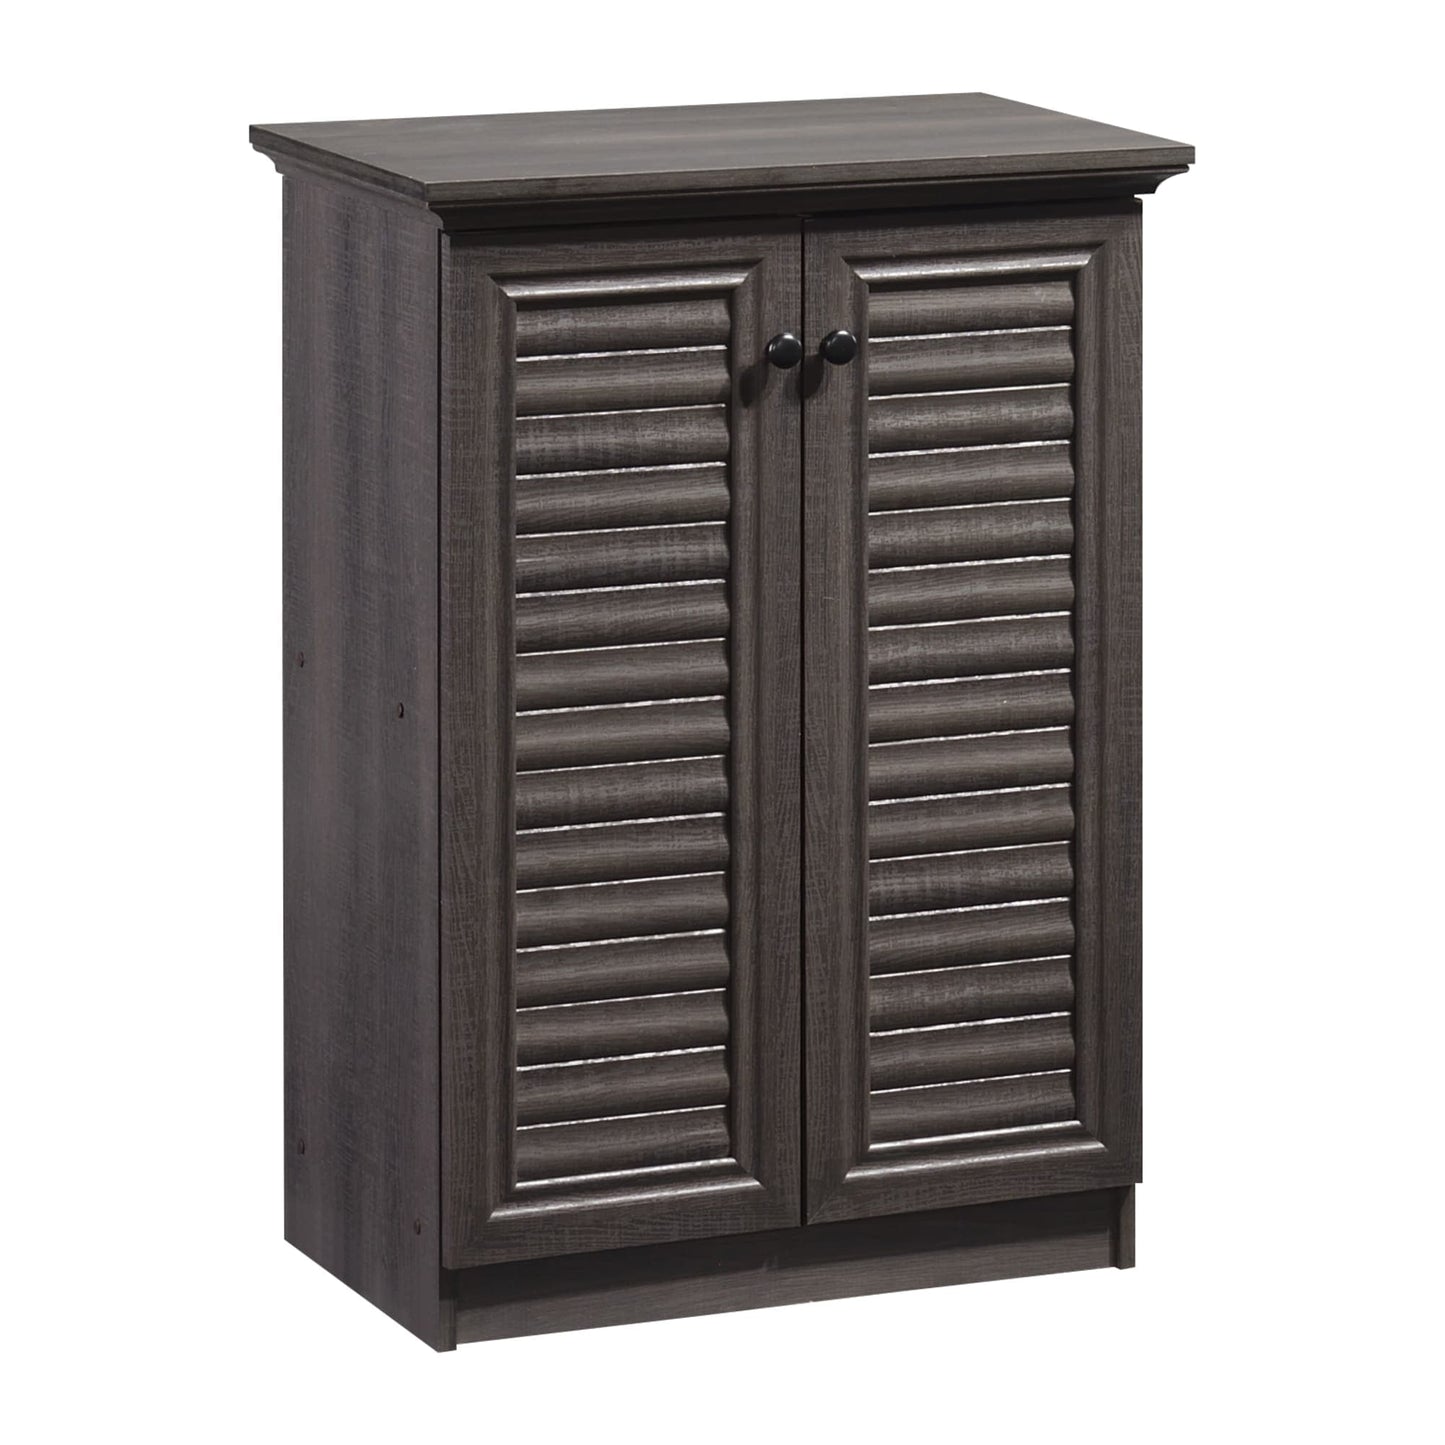 4 Tier Shoe Cabinet with Louvered Doors, Ash